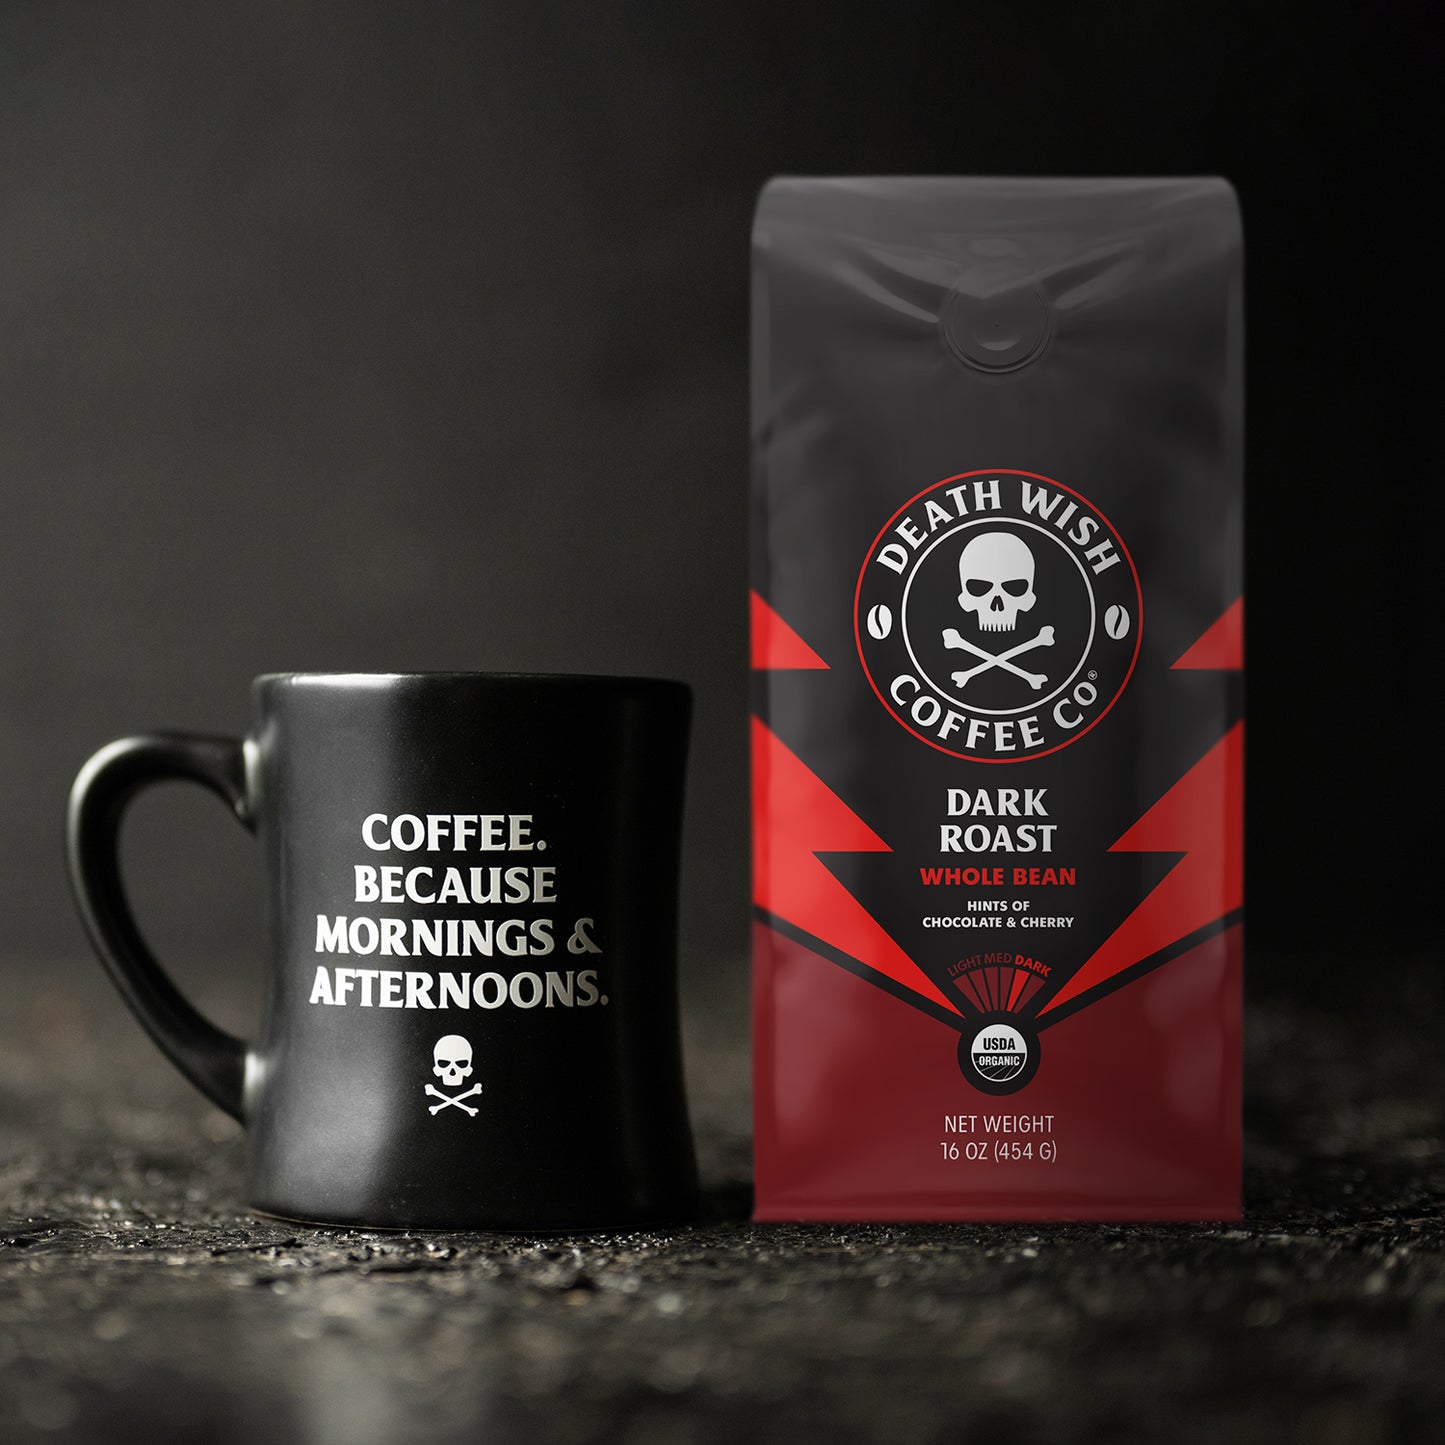 Death Wish Coffee Morning and Afternoon Whole Bean Bundle